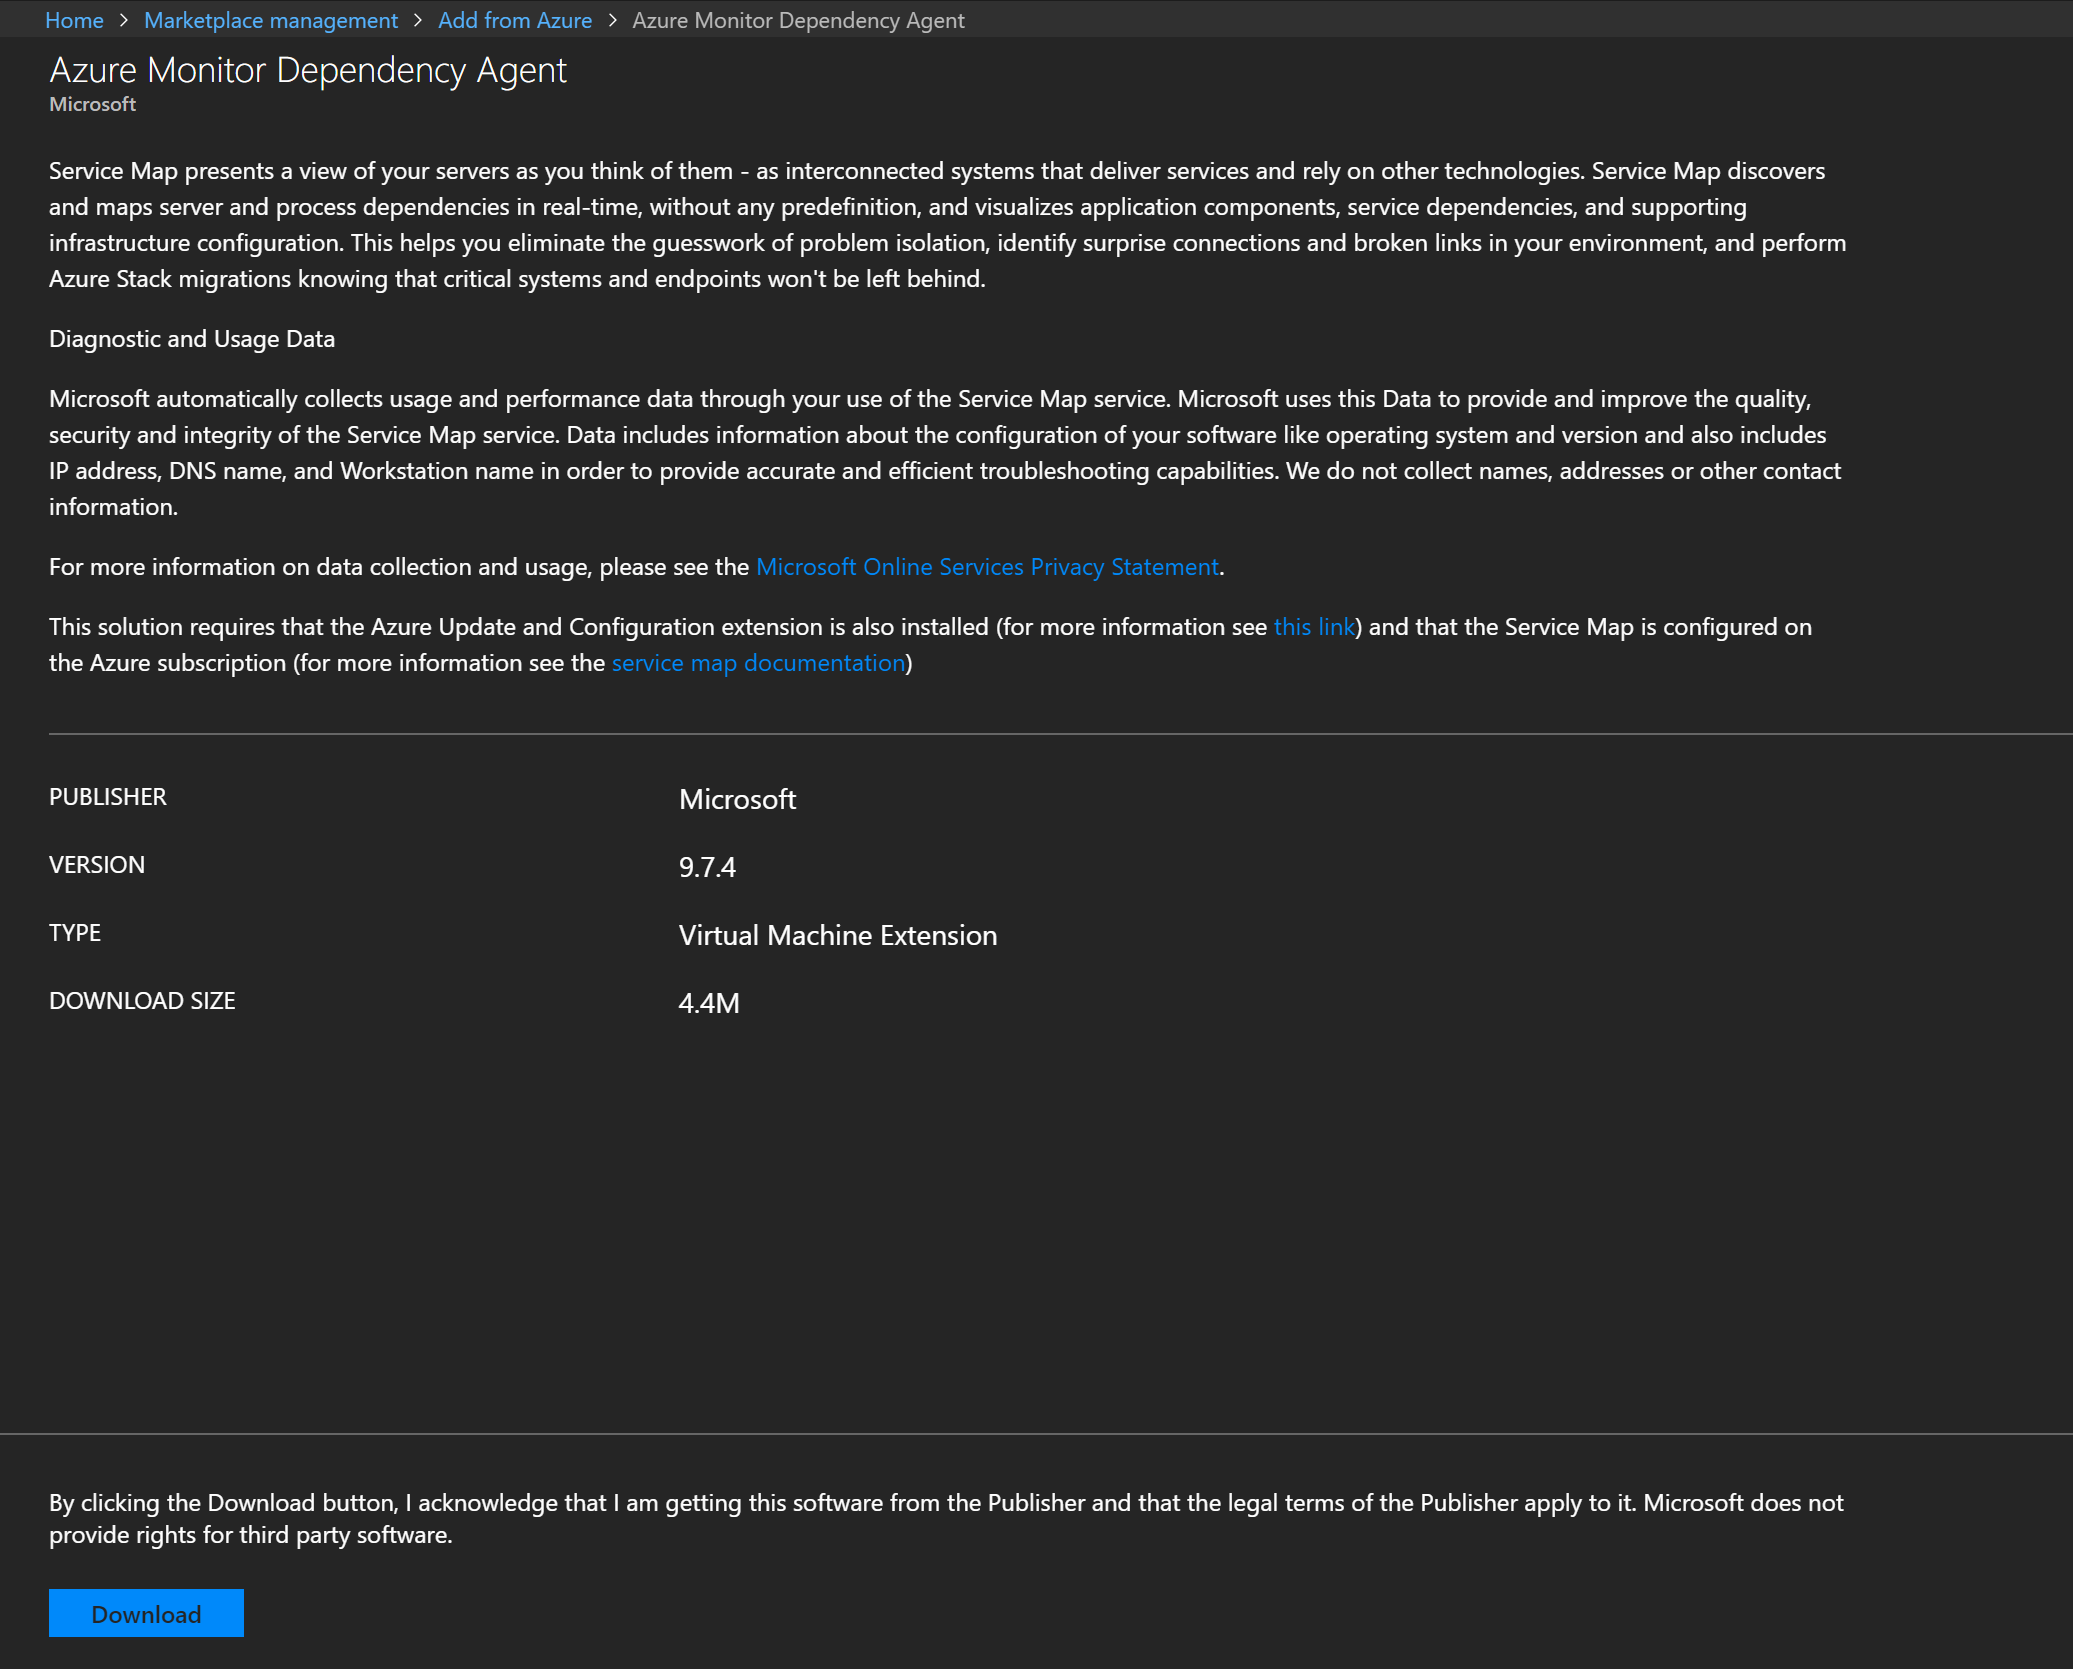 The "Home > Marketplace management > Add from Azure > Azure Monitor Dependency Agent" dialog box describes the extension and provides a Download button.